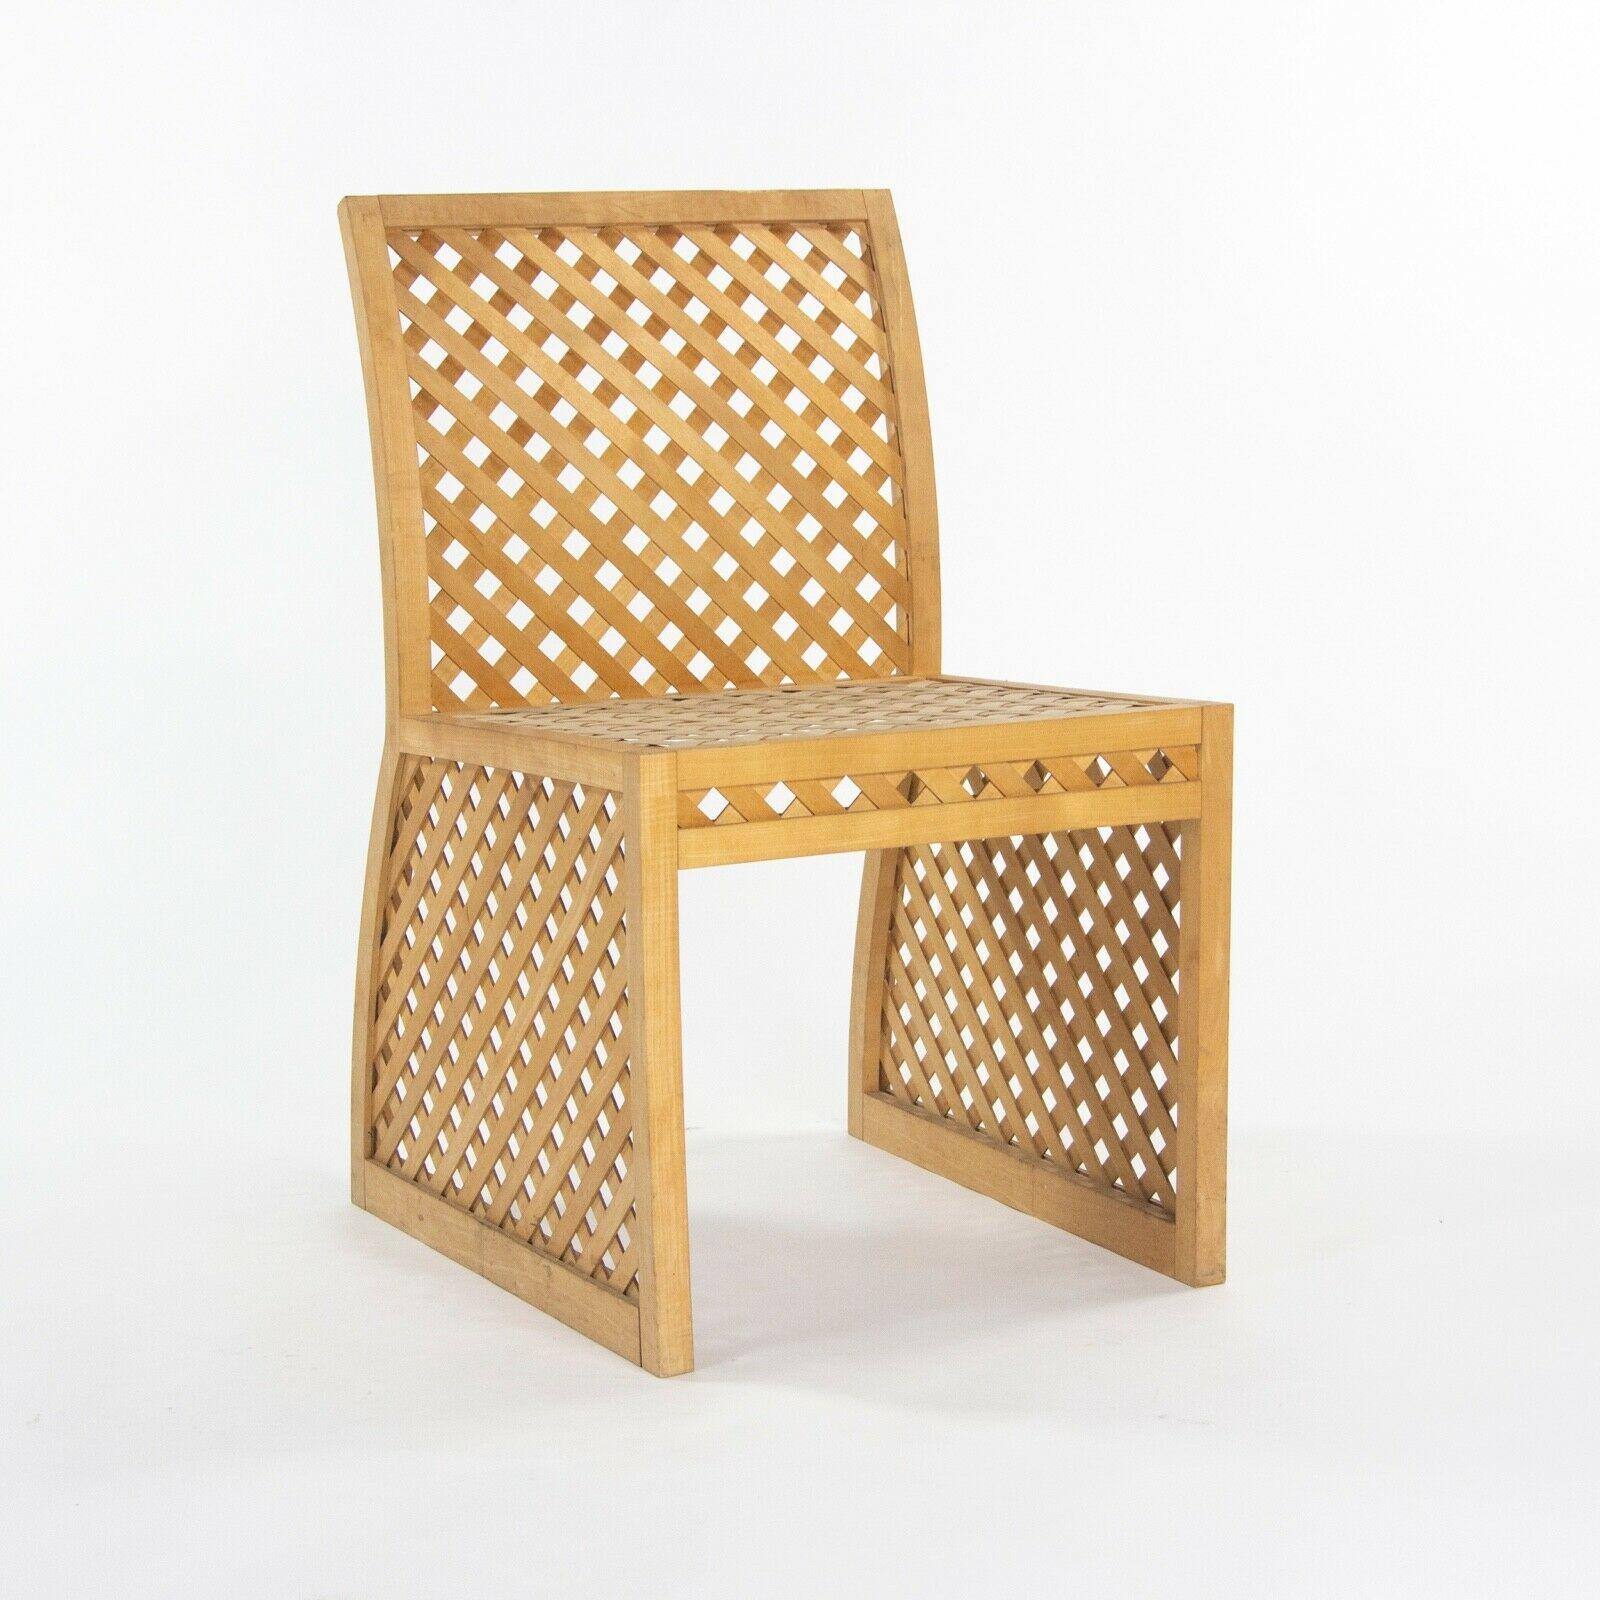 1985 Prototype Richard Schultz Wooden Outdoor Collection Dining Chair For Sale 3